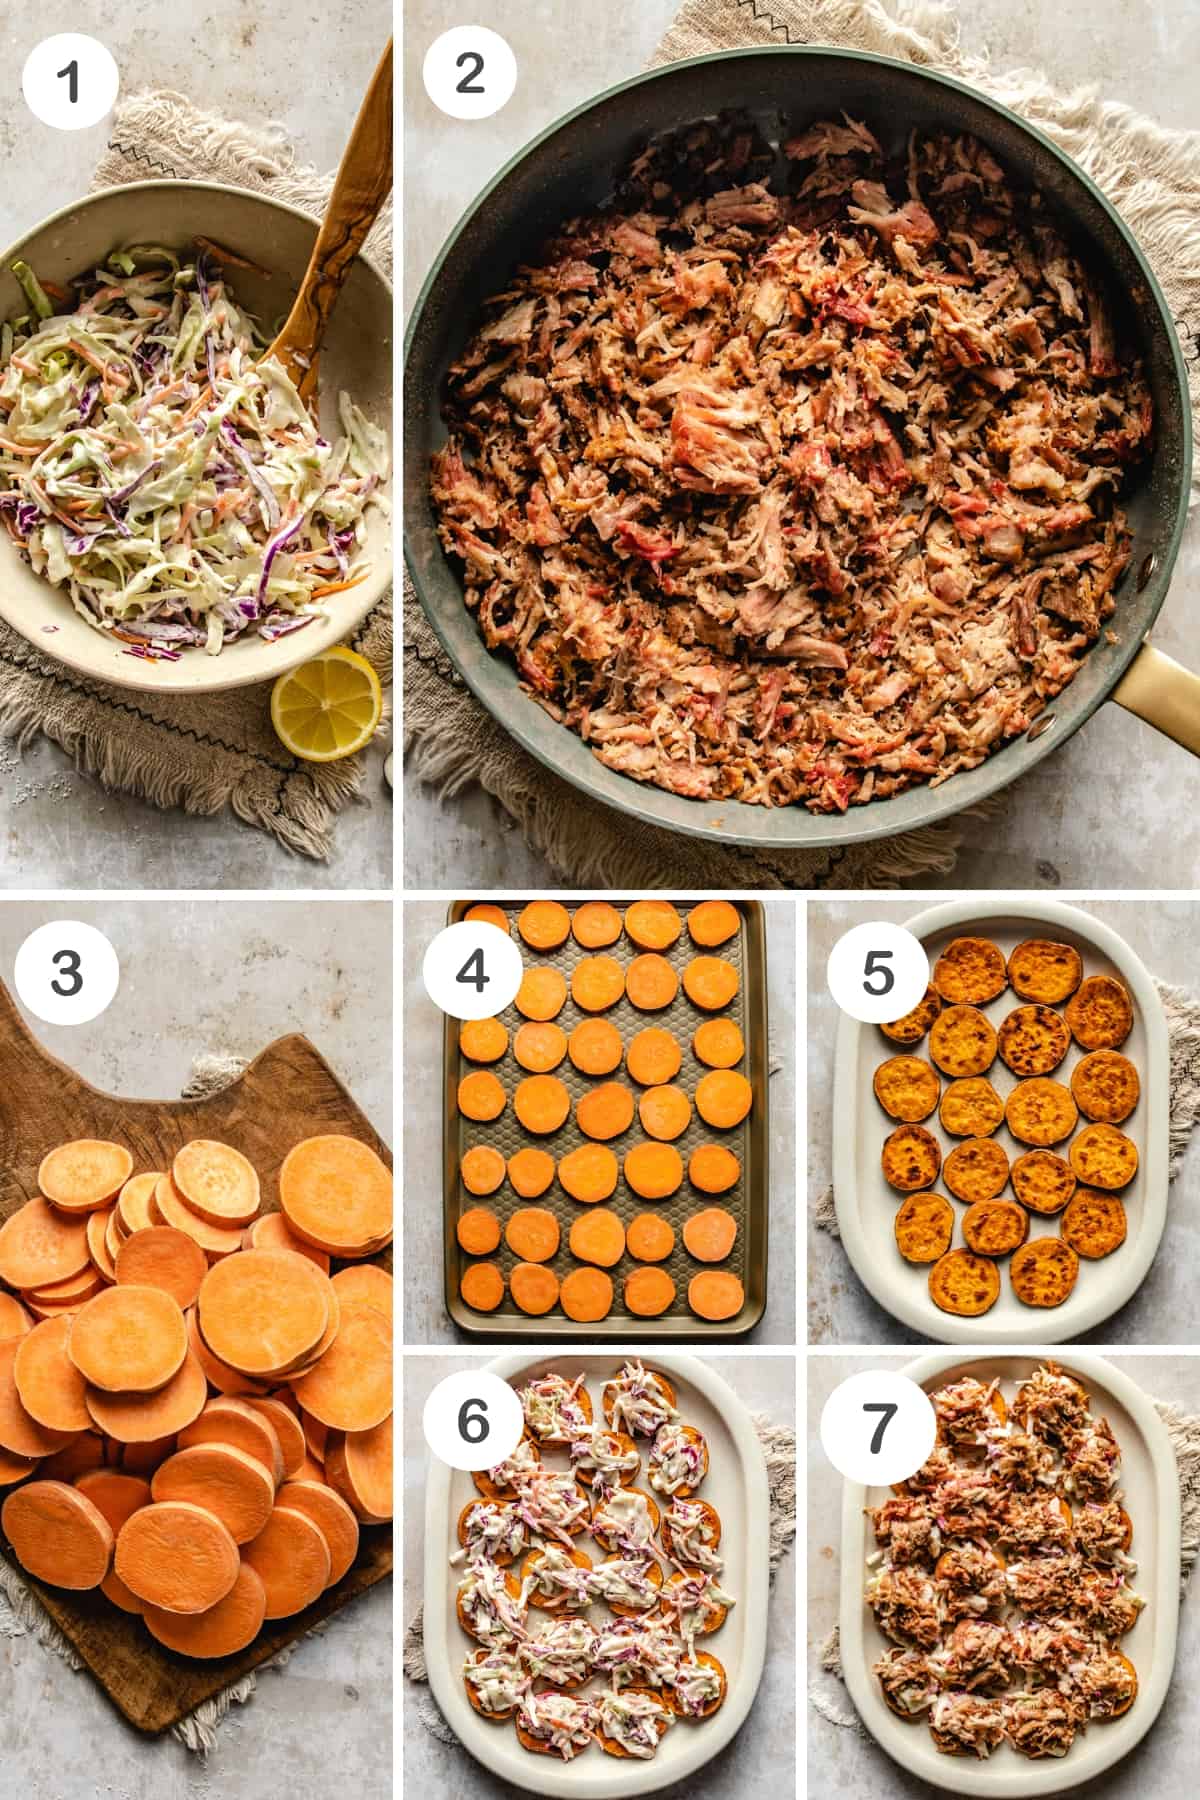 numbered step by step photos showing how to make pulled pork sliders with sweet potato buns